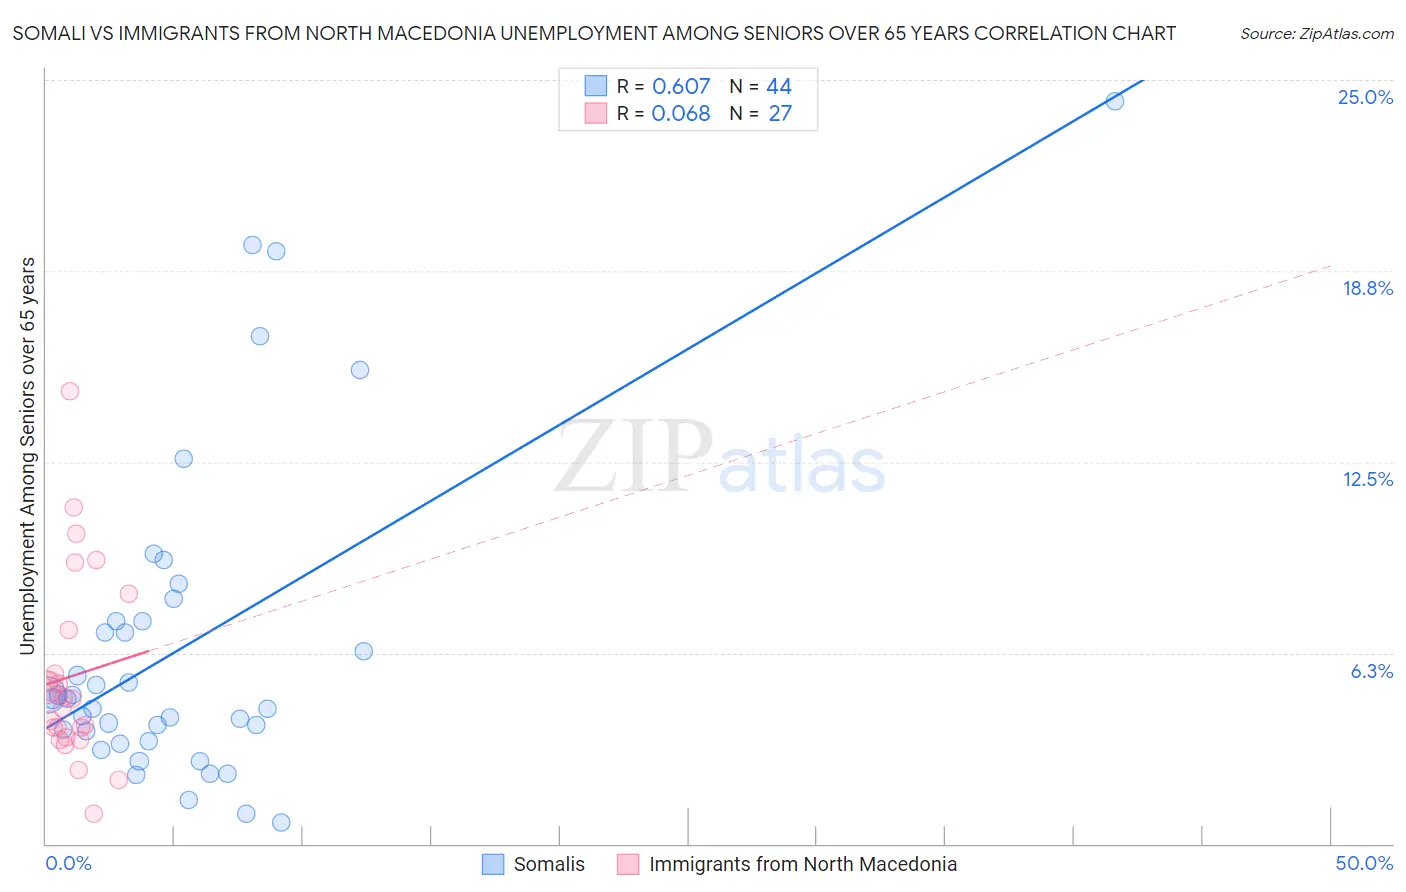 Somali vs Immigrants from North Macedonia Unemployment Among Seniors over 65 years